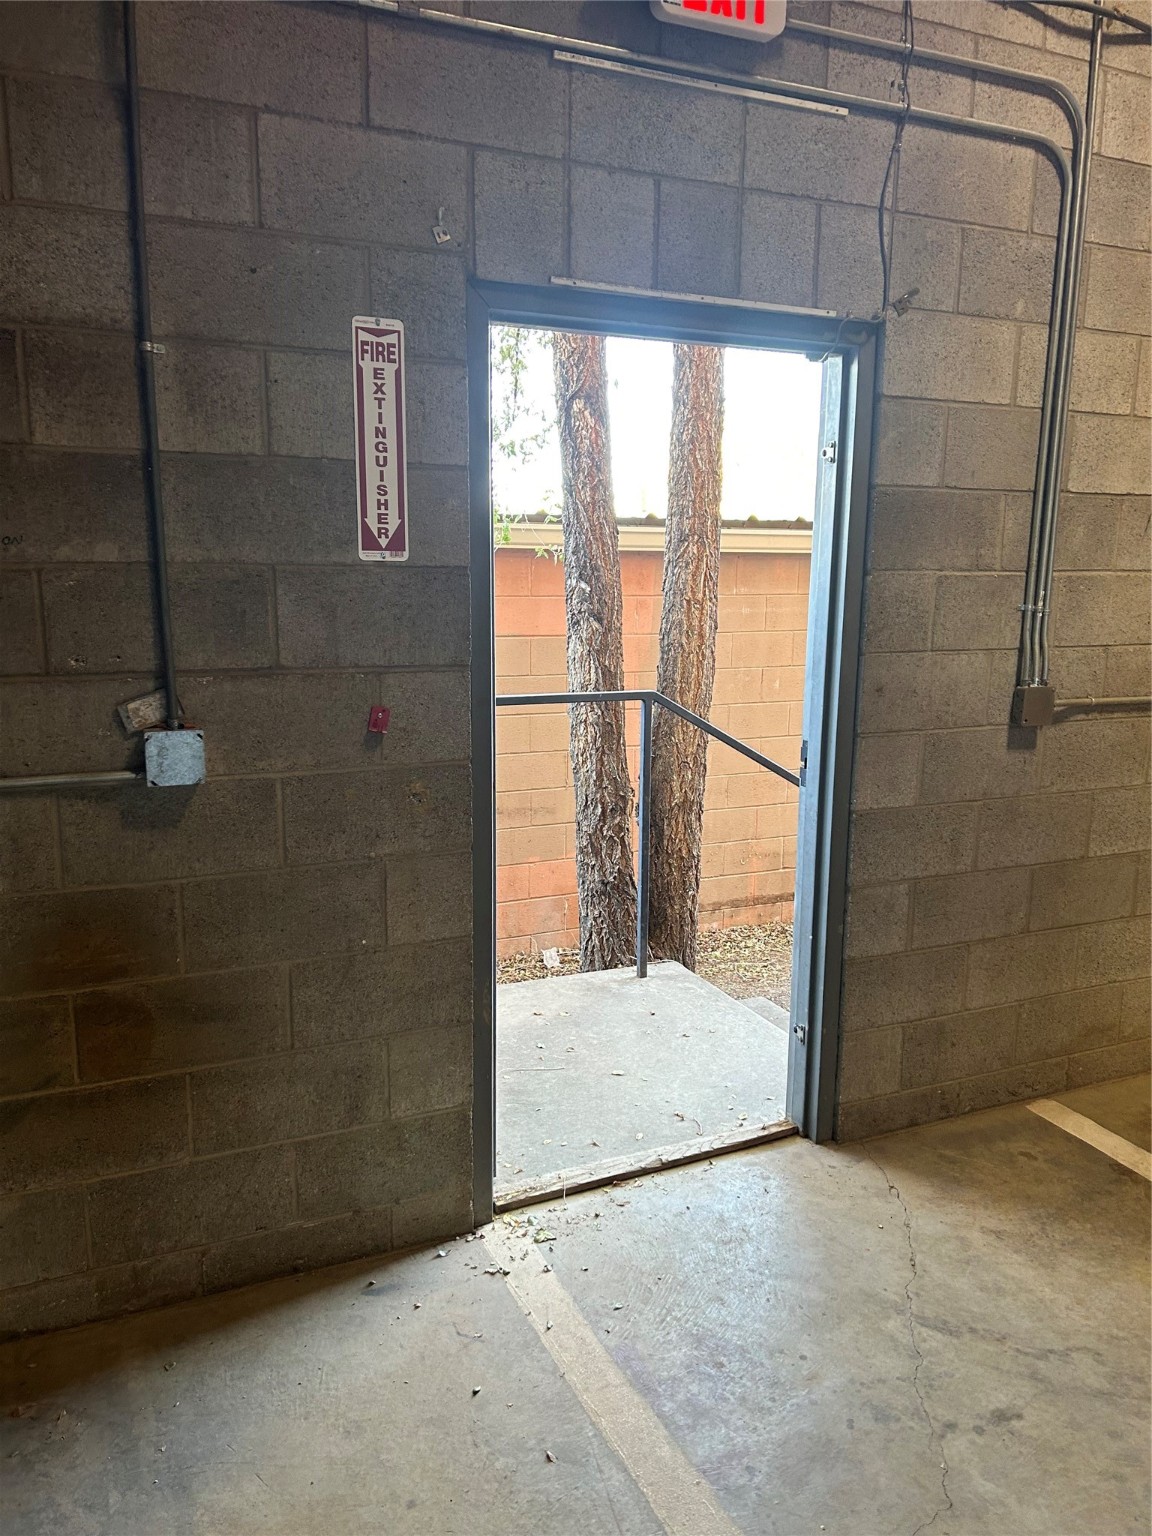 Back door opening into alley and back parking lot
